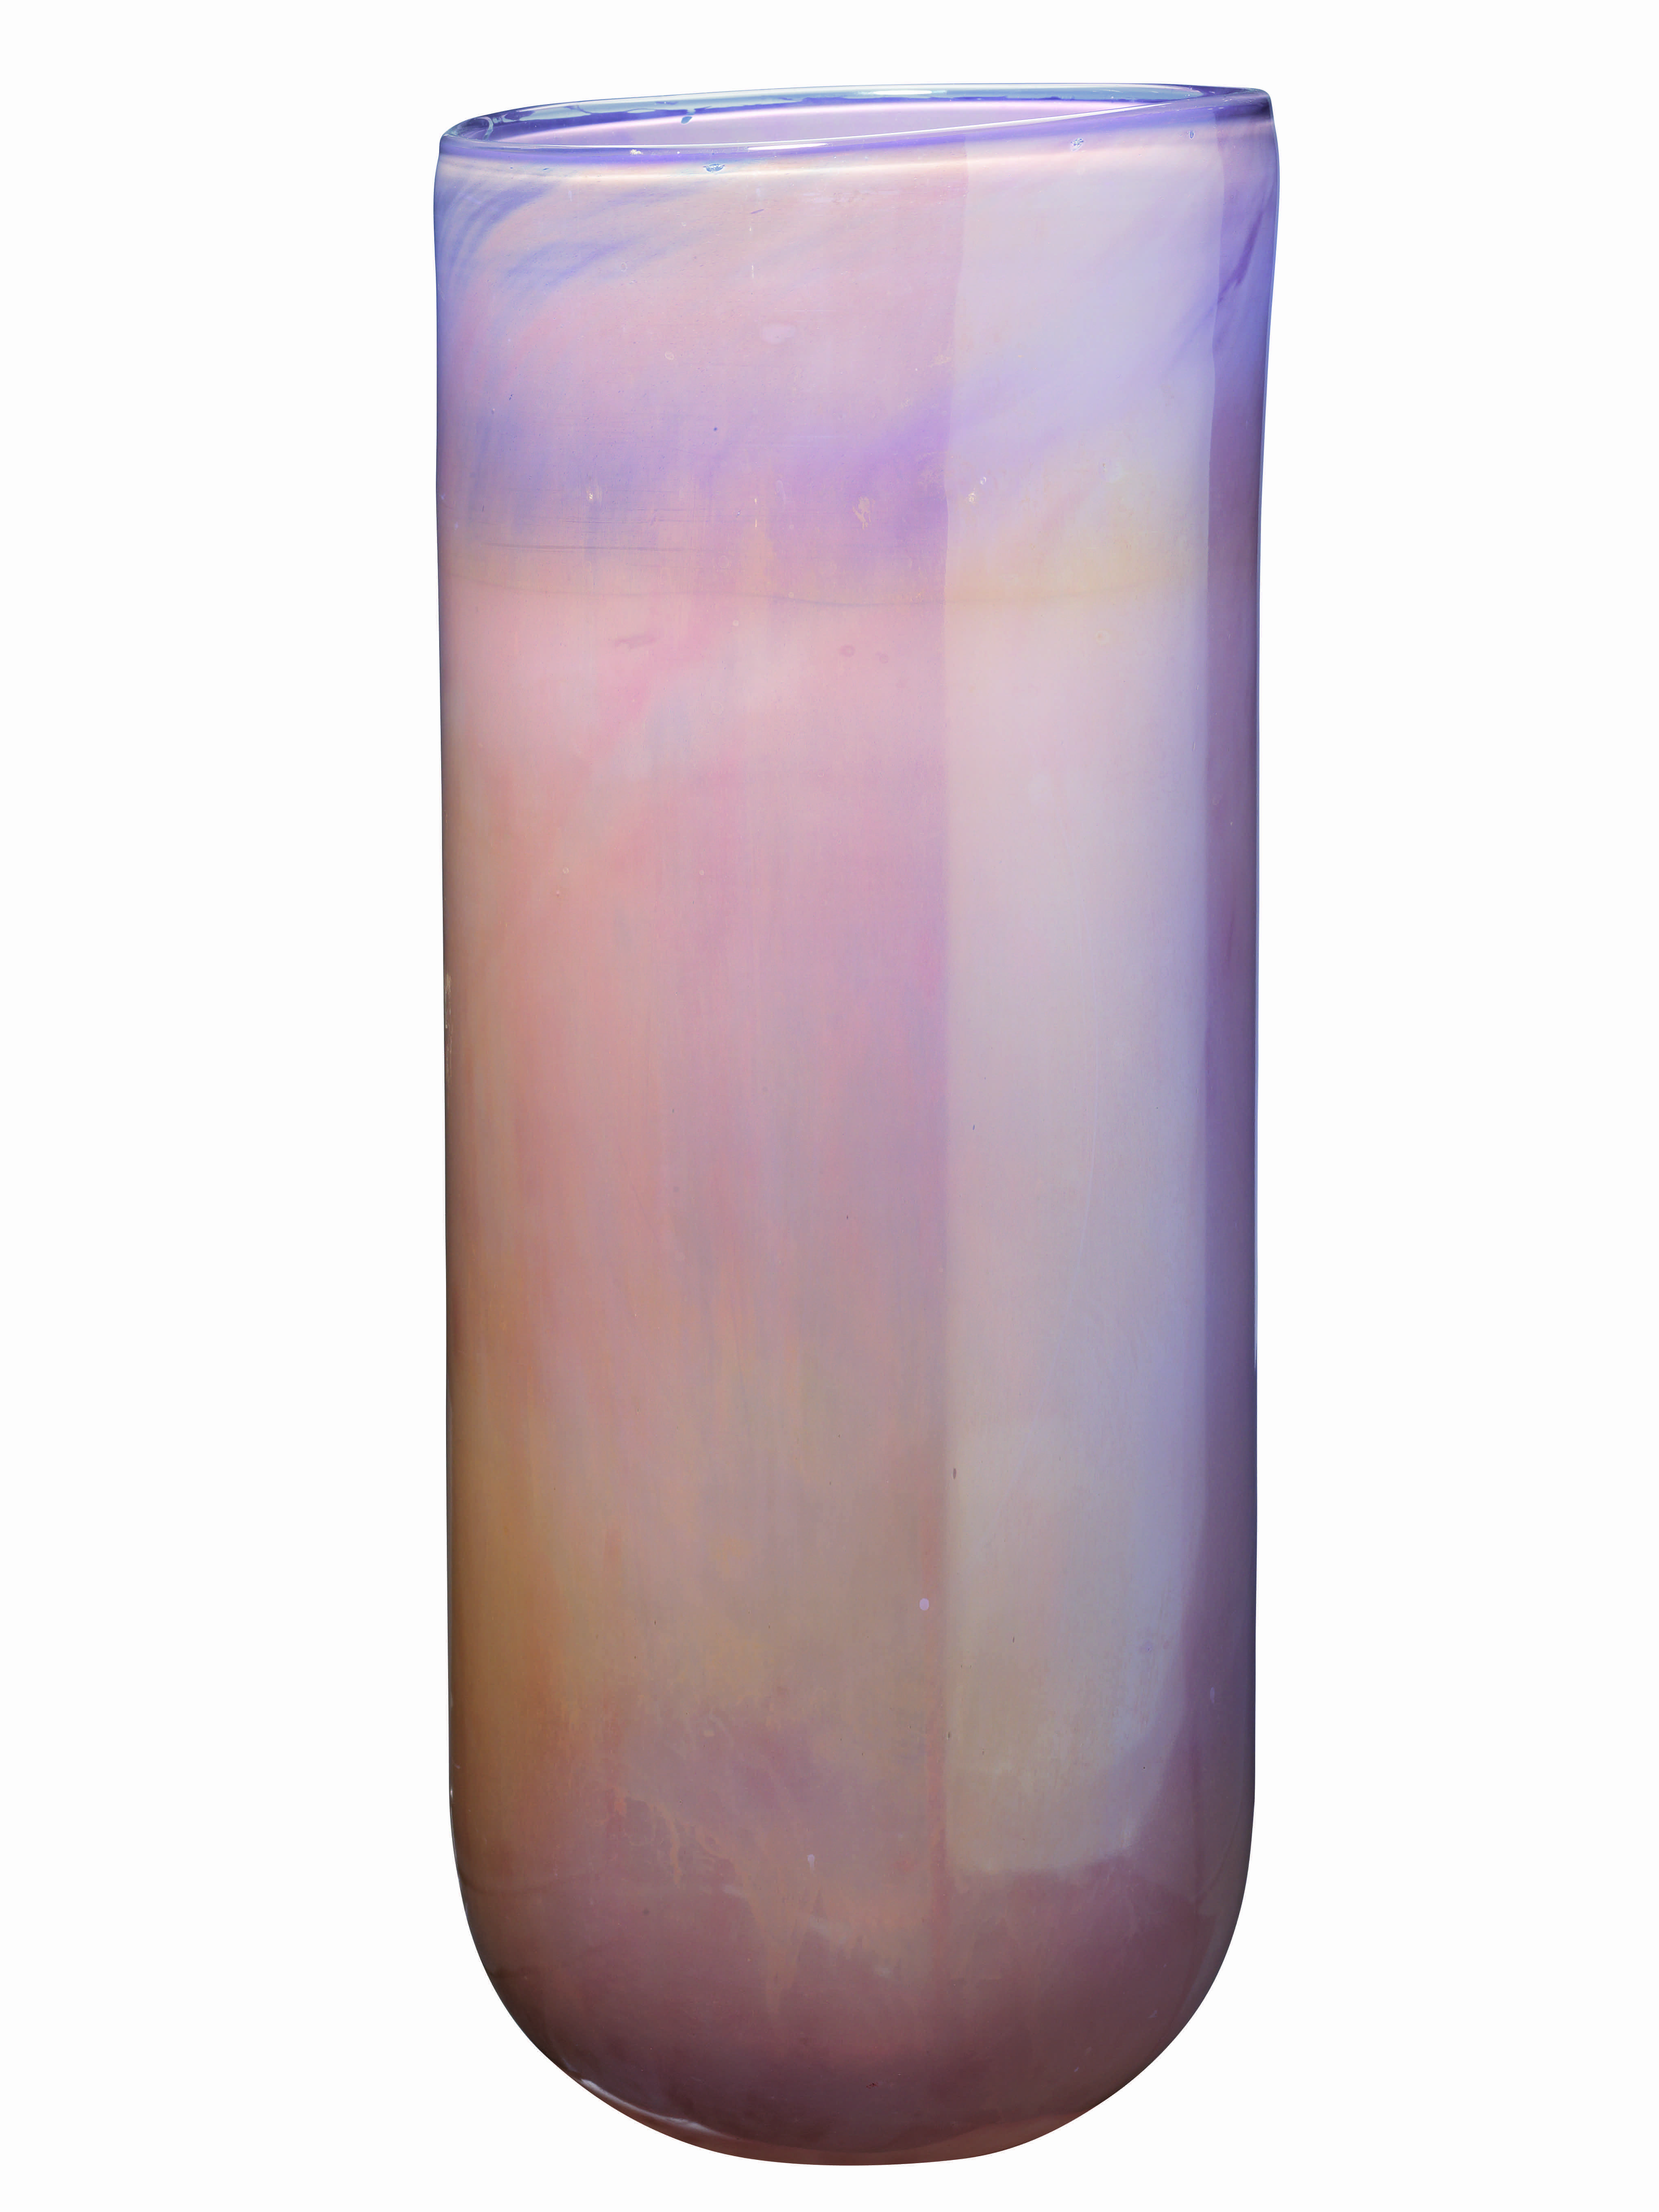 Vapor vase with a Metallic Lavender finish from Jamie Young